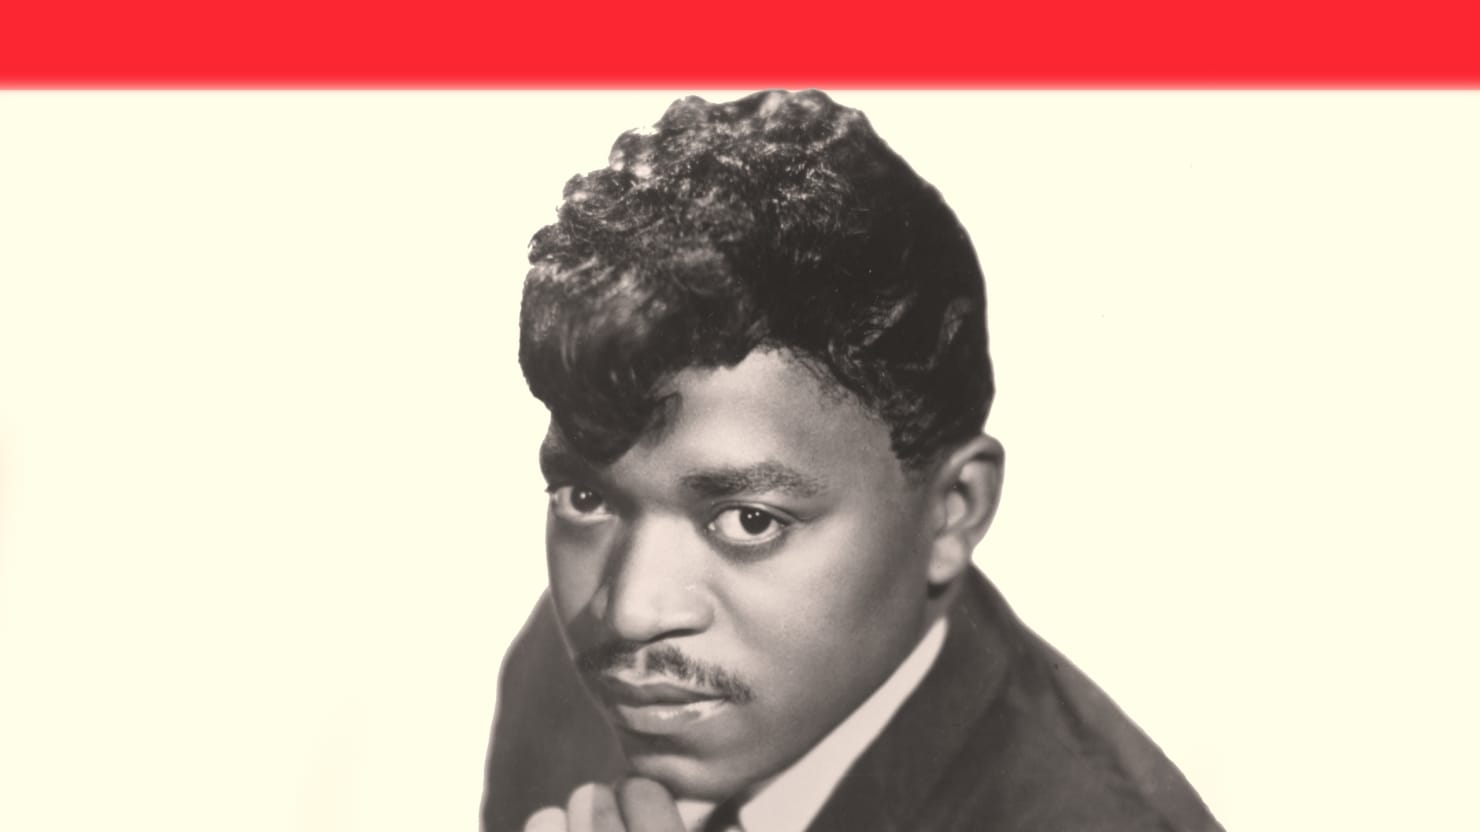 Percy Sledge - When a Man Loves a Woman: lyrics and songs